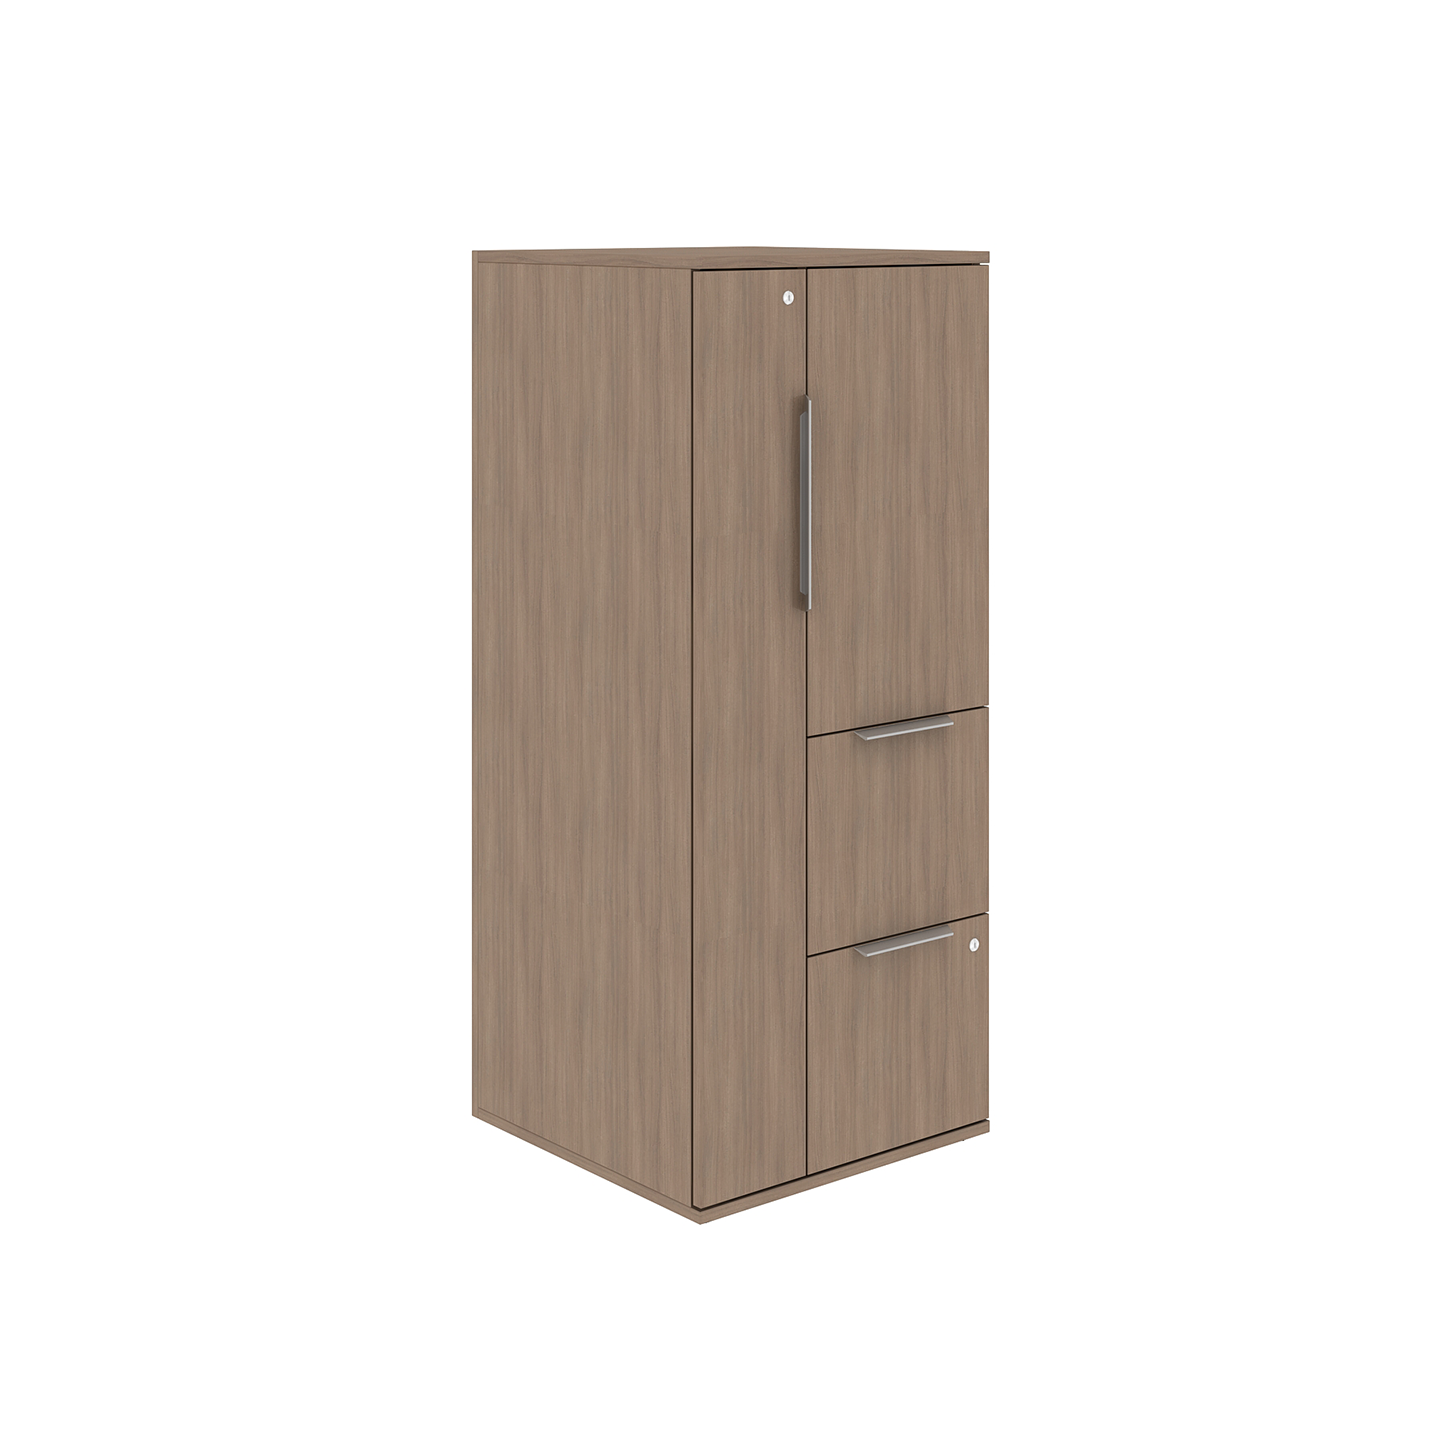 Tall cabinet with wardrobe door and drawers in walnut woodgrain finish